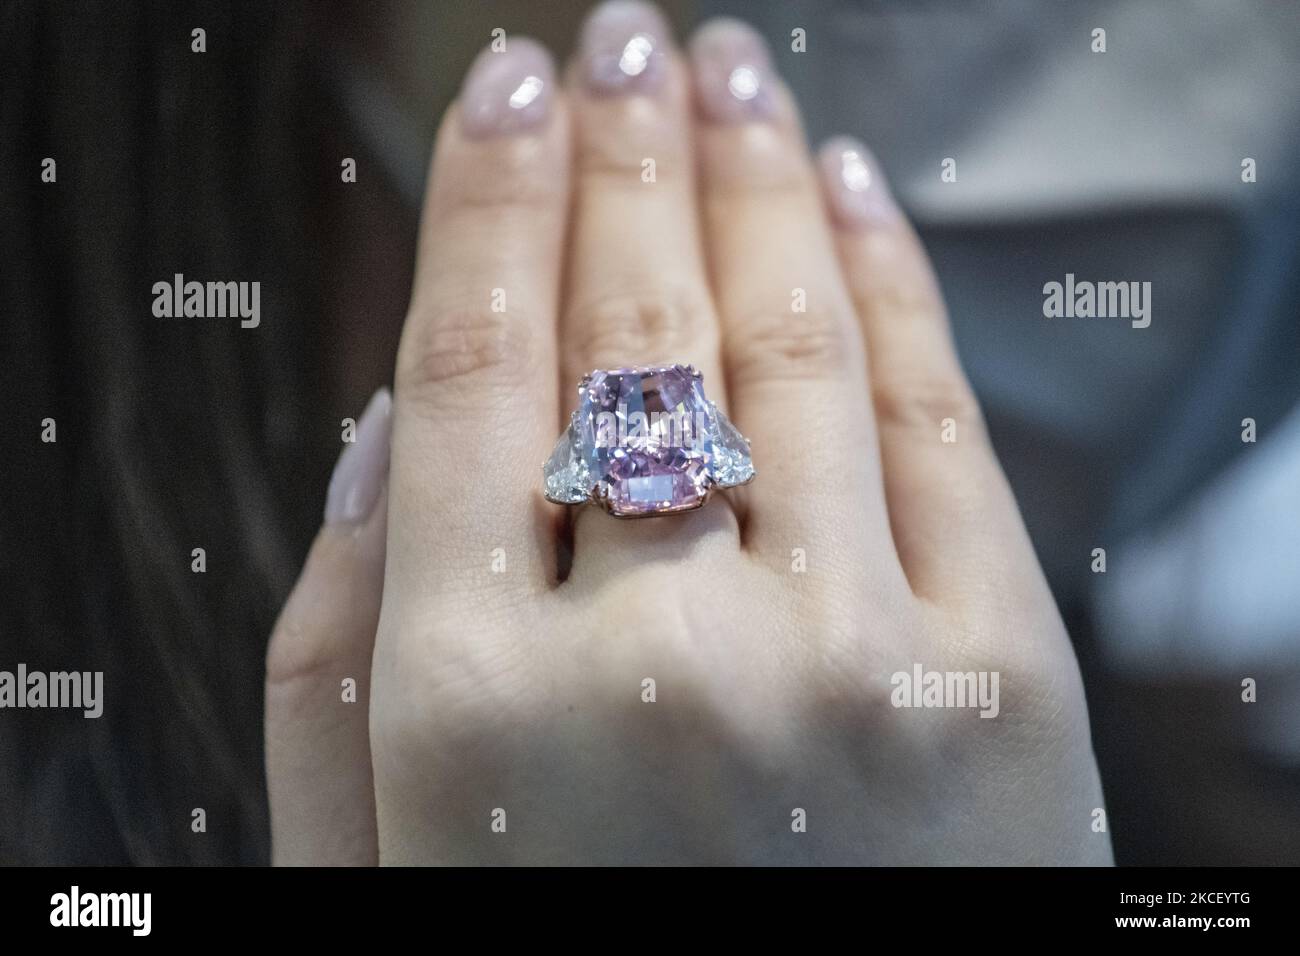 A woman displays the Sakura Diamond during preview at Christie's in Hong Kong, China, 20 May 2021. The 15.81 Carat Fancy Vivid Purple Pink Internally Flawless Type lla Diamond Ring will be auctioned in Hong Kong on 23 May 2021 for an estimated 25 million to 38 million US dollars. (Photo by Vernon Yuen/NurPhoto) Stock Photo